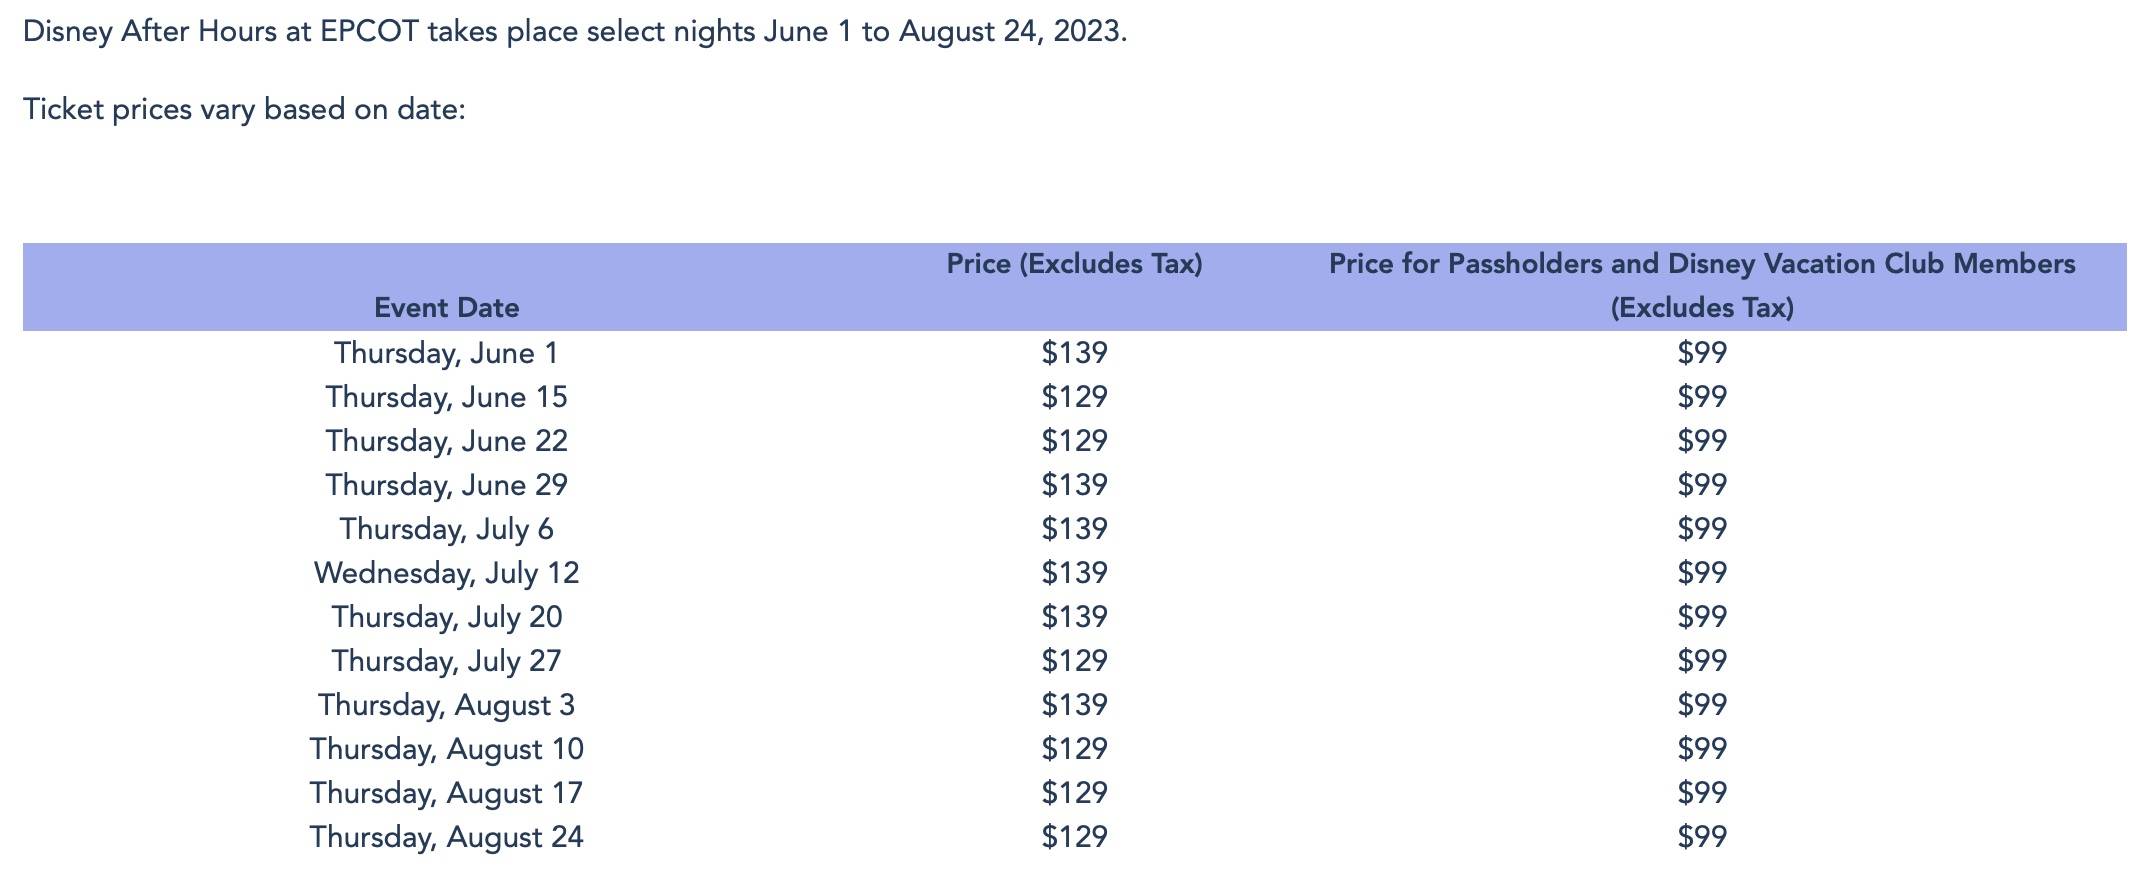 Disney After Hours at EPCOT pricing